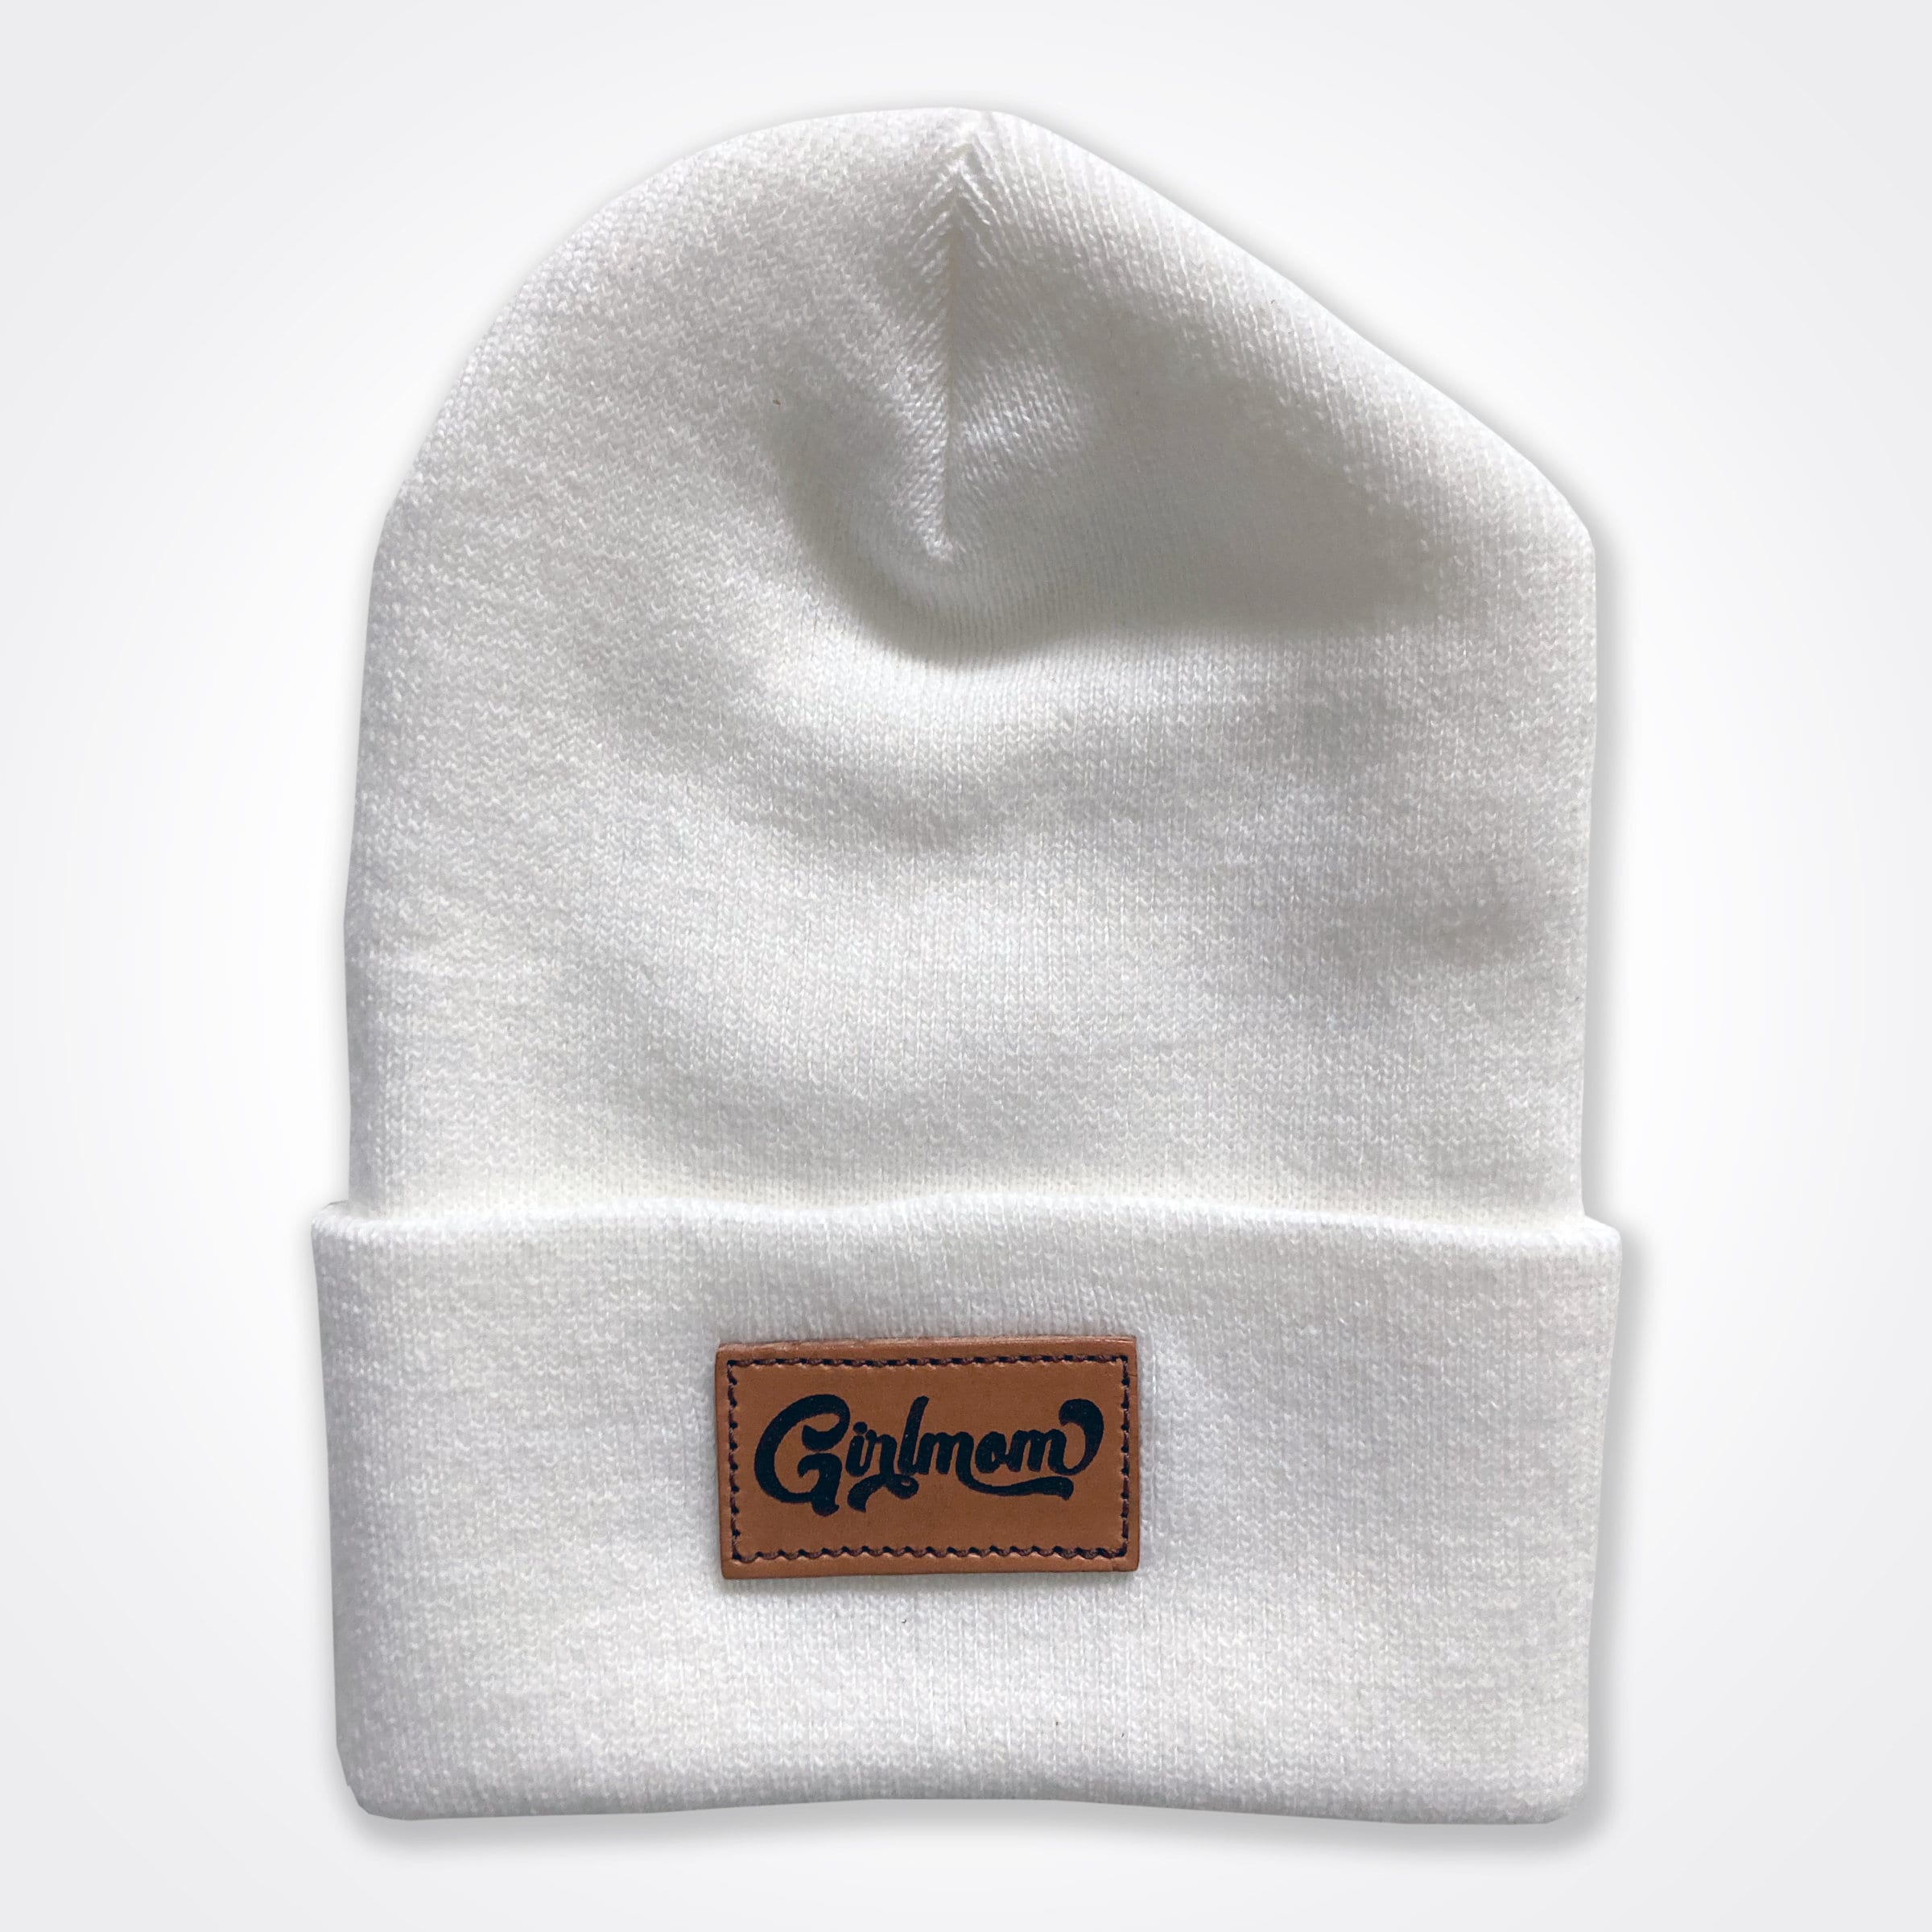 Girlmom® Retro Leather Patch Beanie In Olive & White options